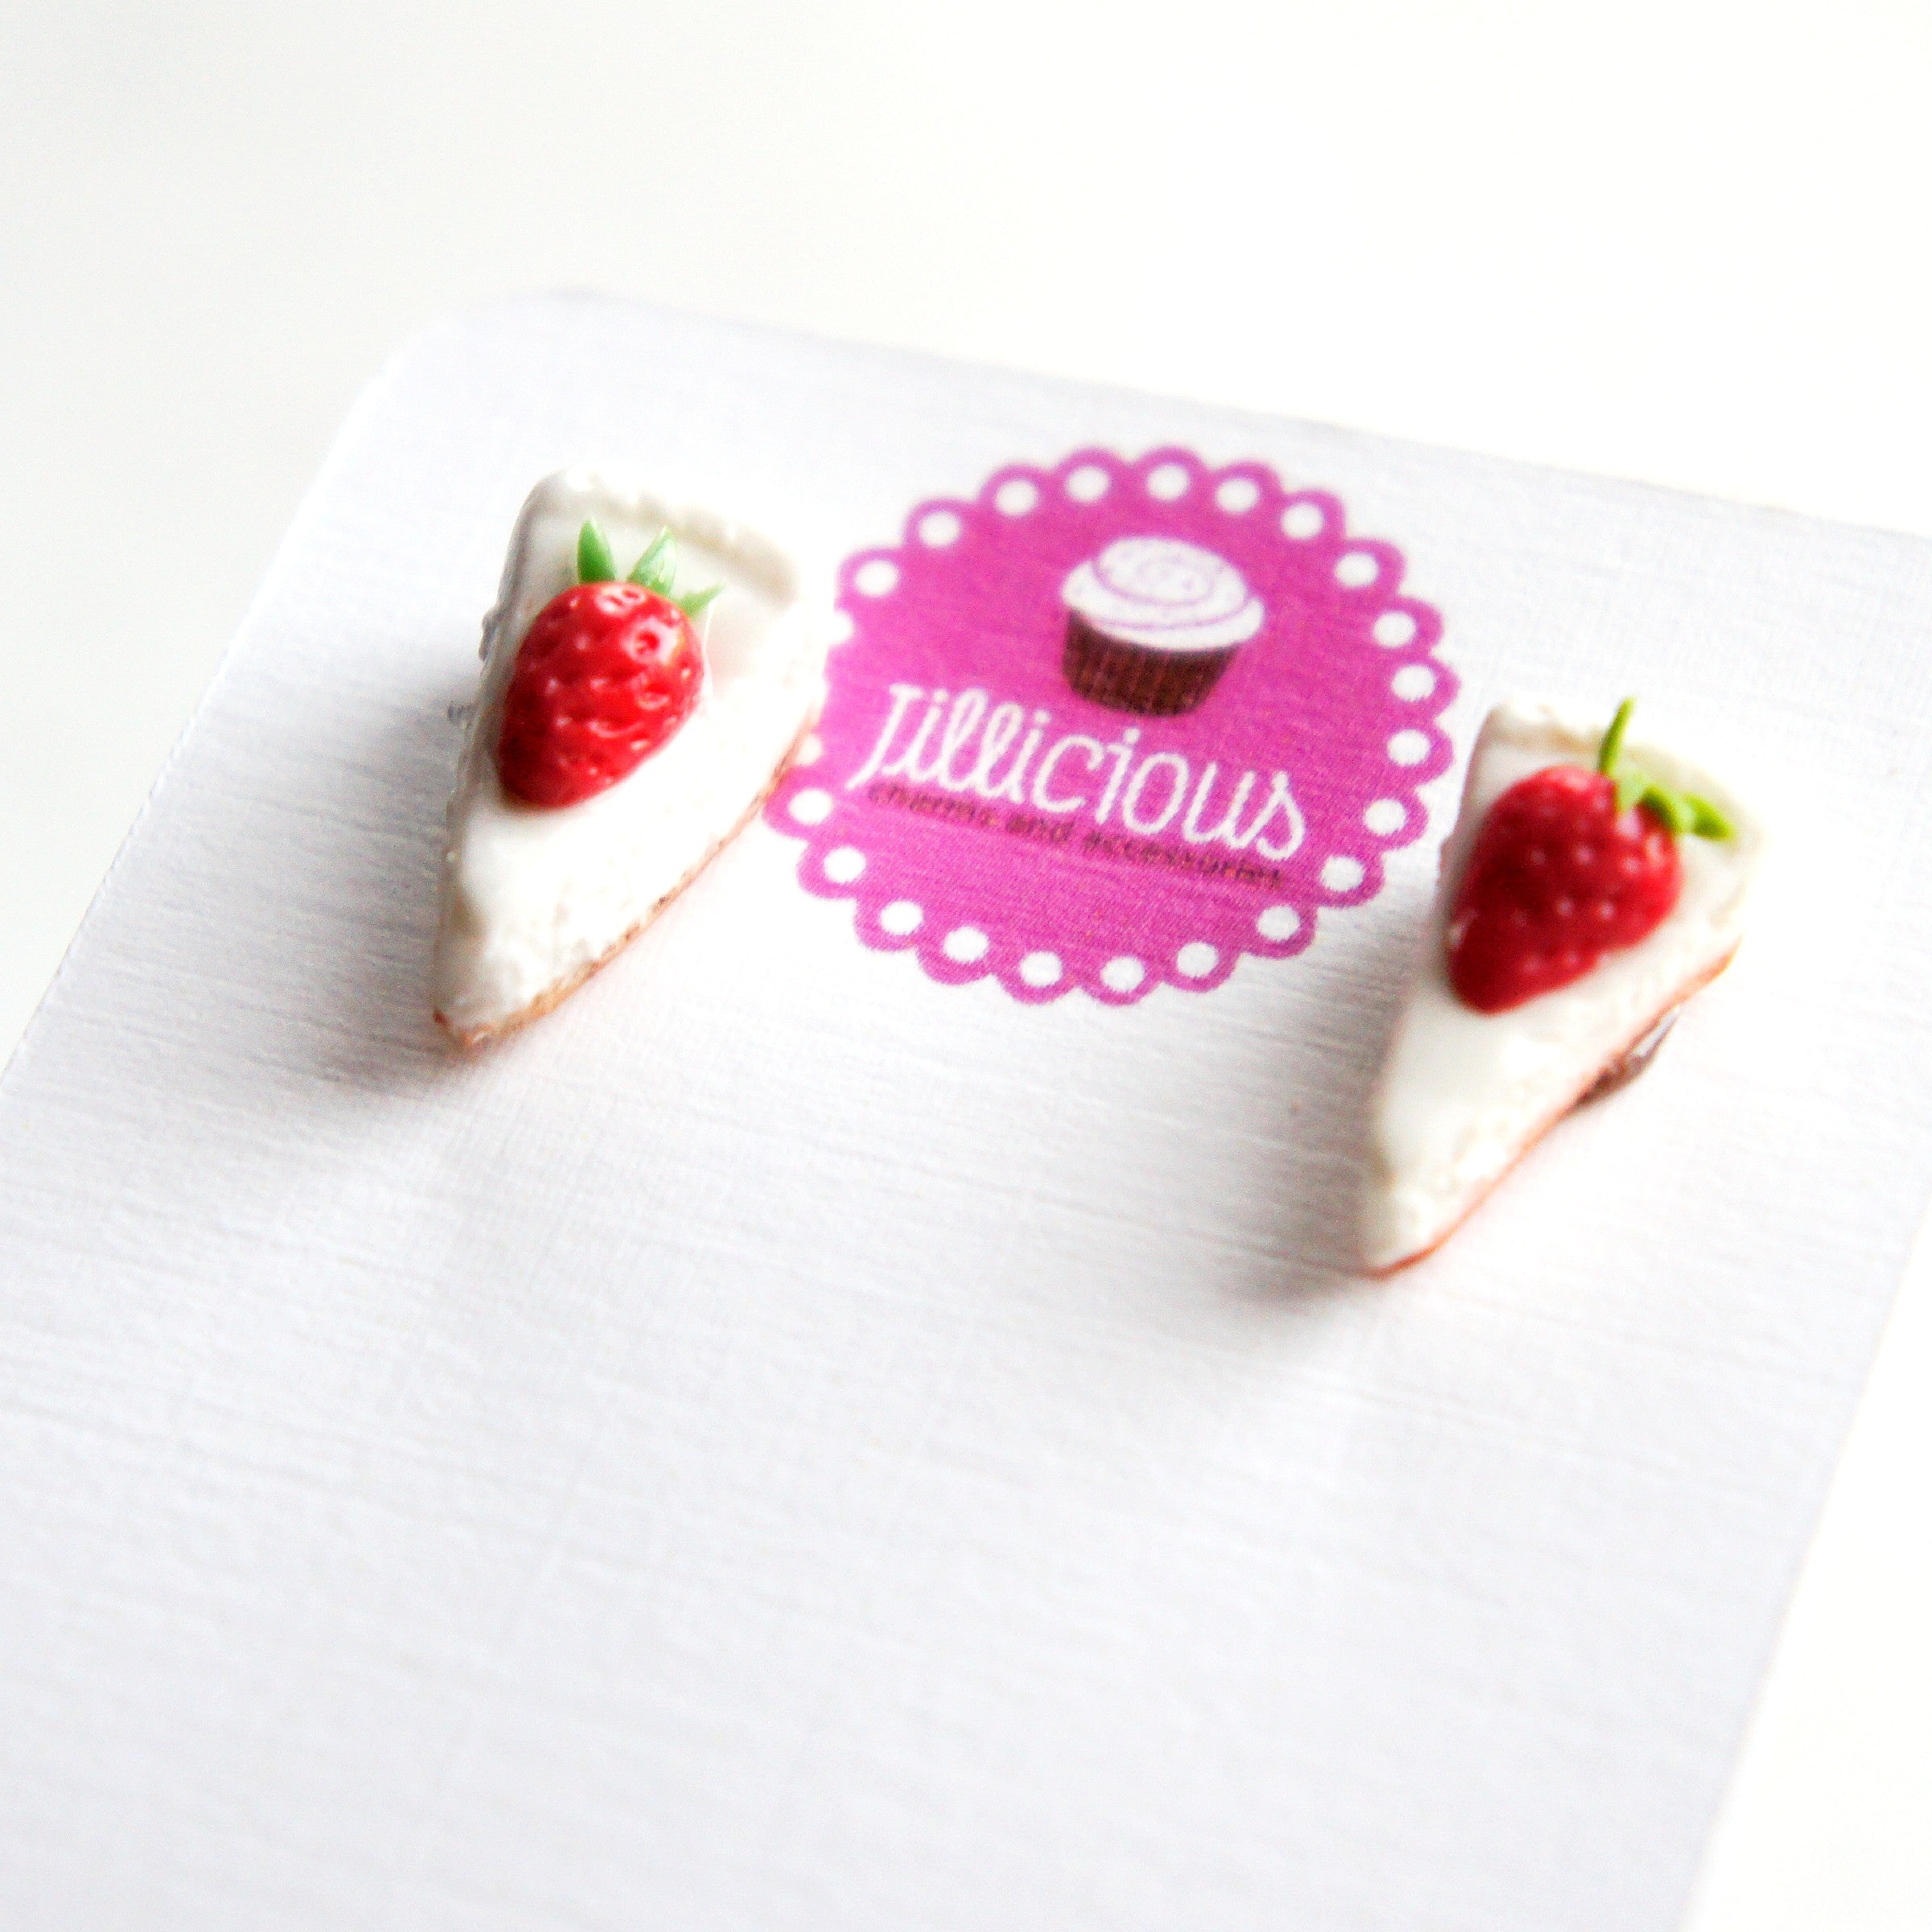 Strawberry Cheesecake Stud Earrings - Jillicious charms and accessories